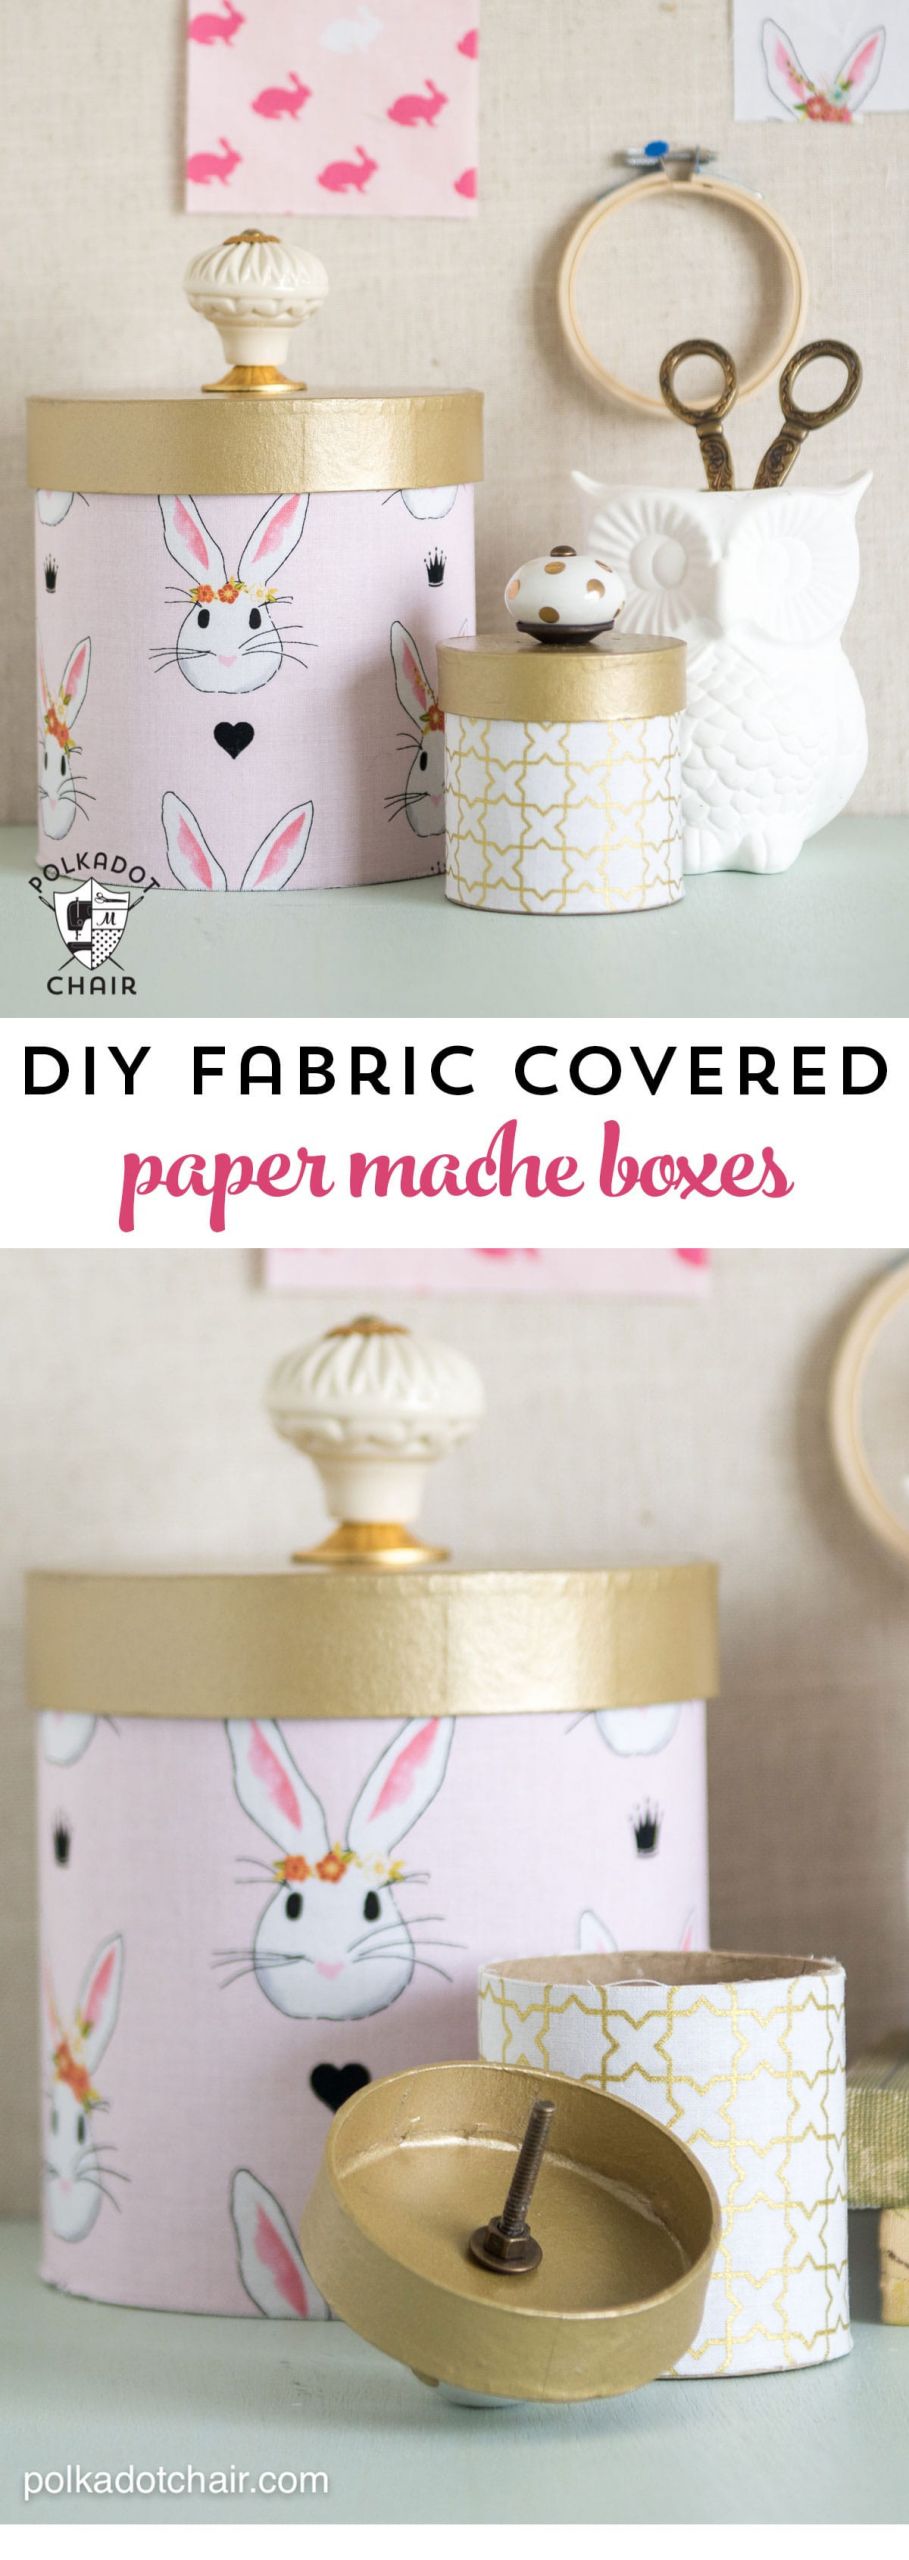 DIY Paper Mache Box
 How to Cover Paper Mache Boxes with Fabric The Polka Dot